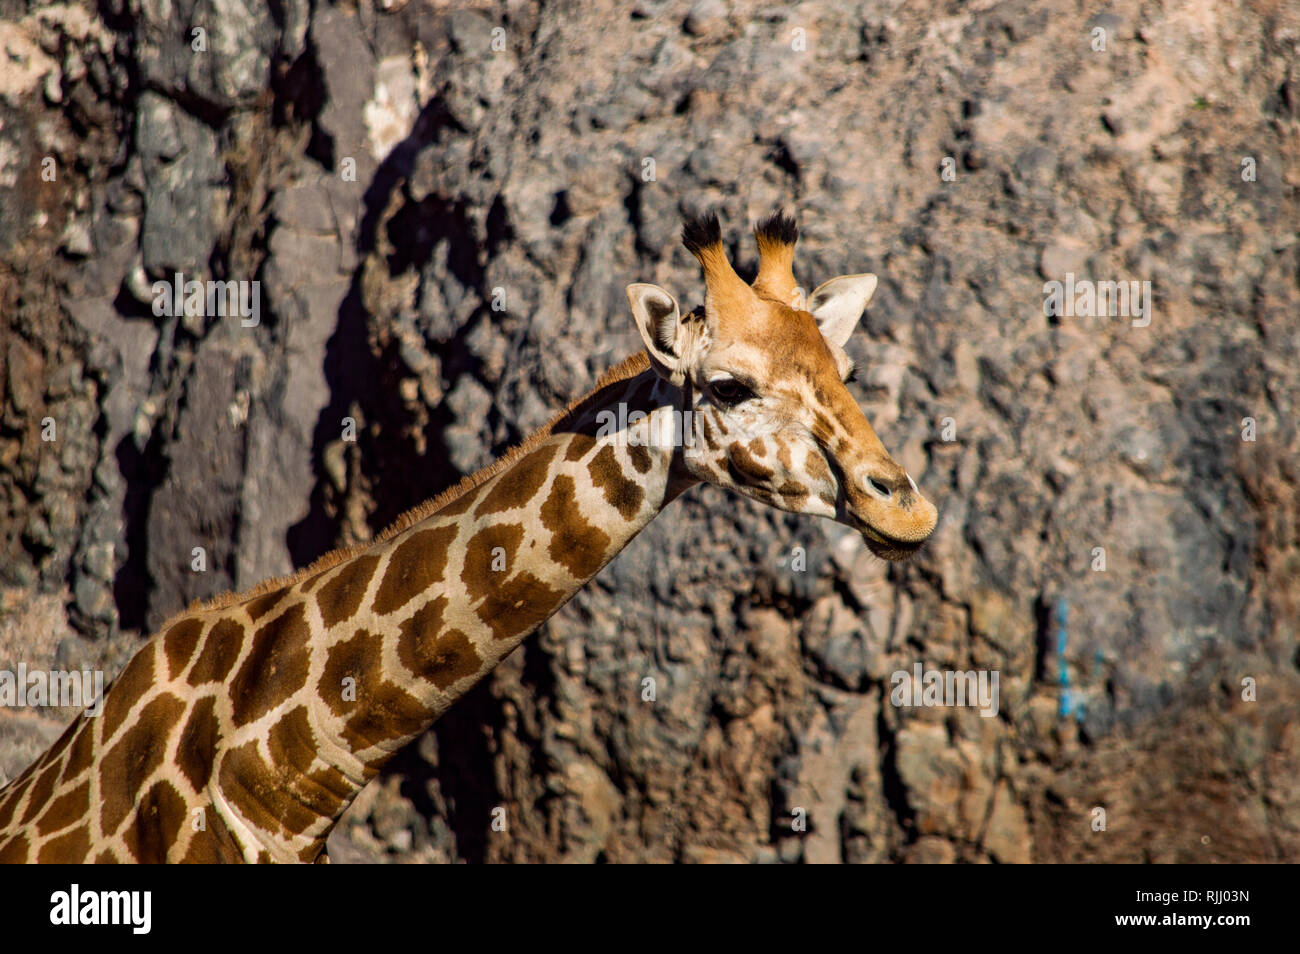 A giraffe at the Oasis Park in Fuerteventura, Canary Islands Stock Photo